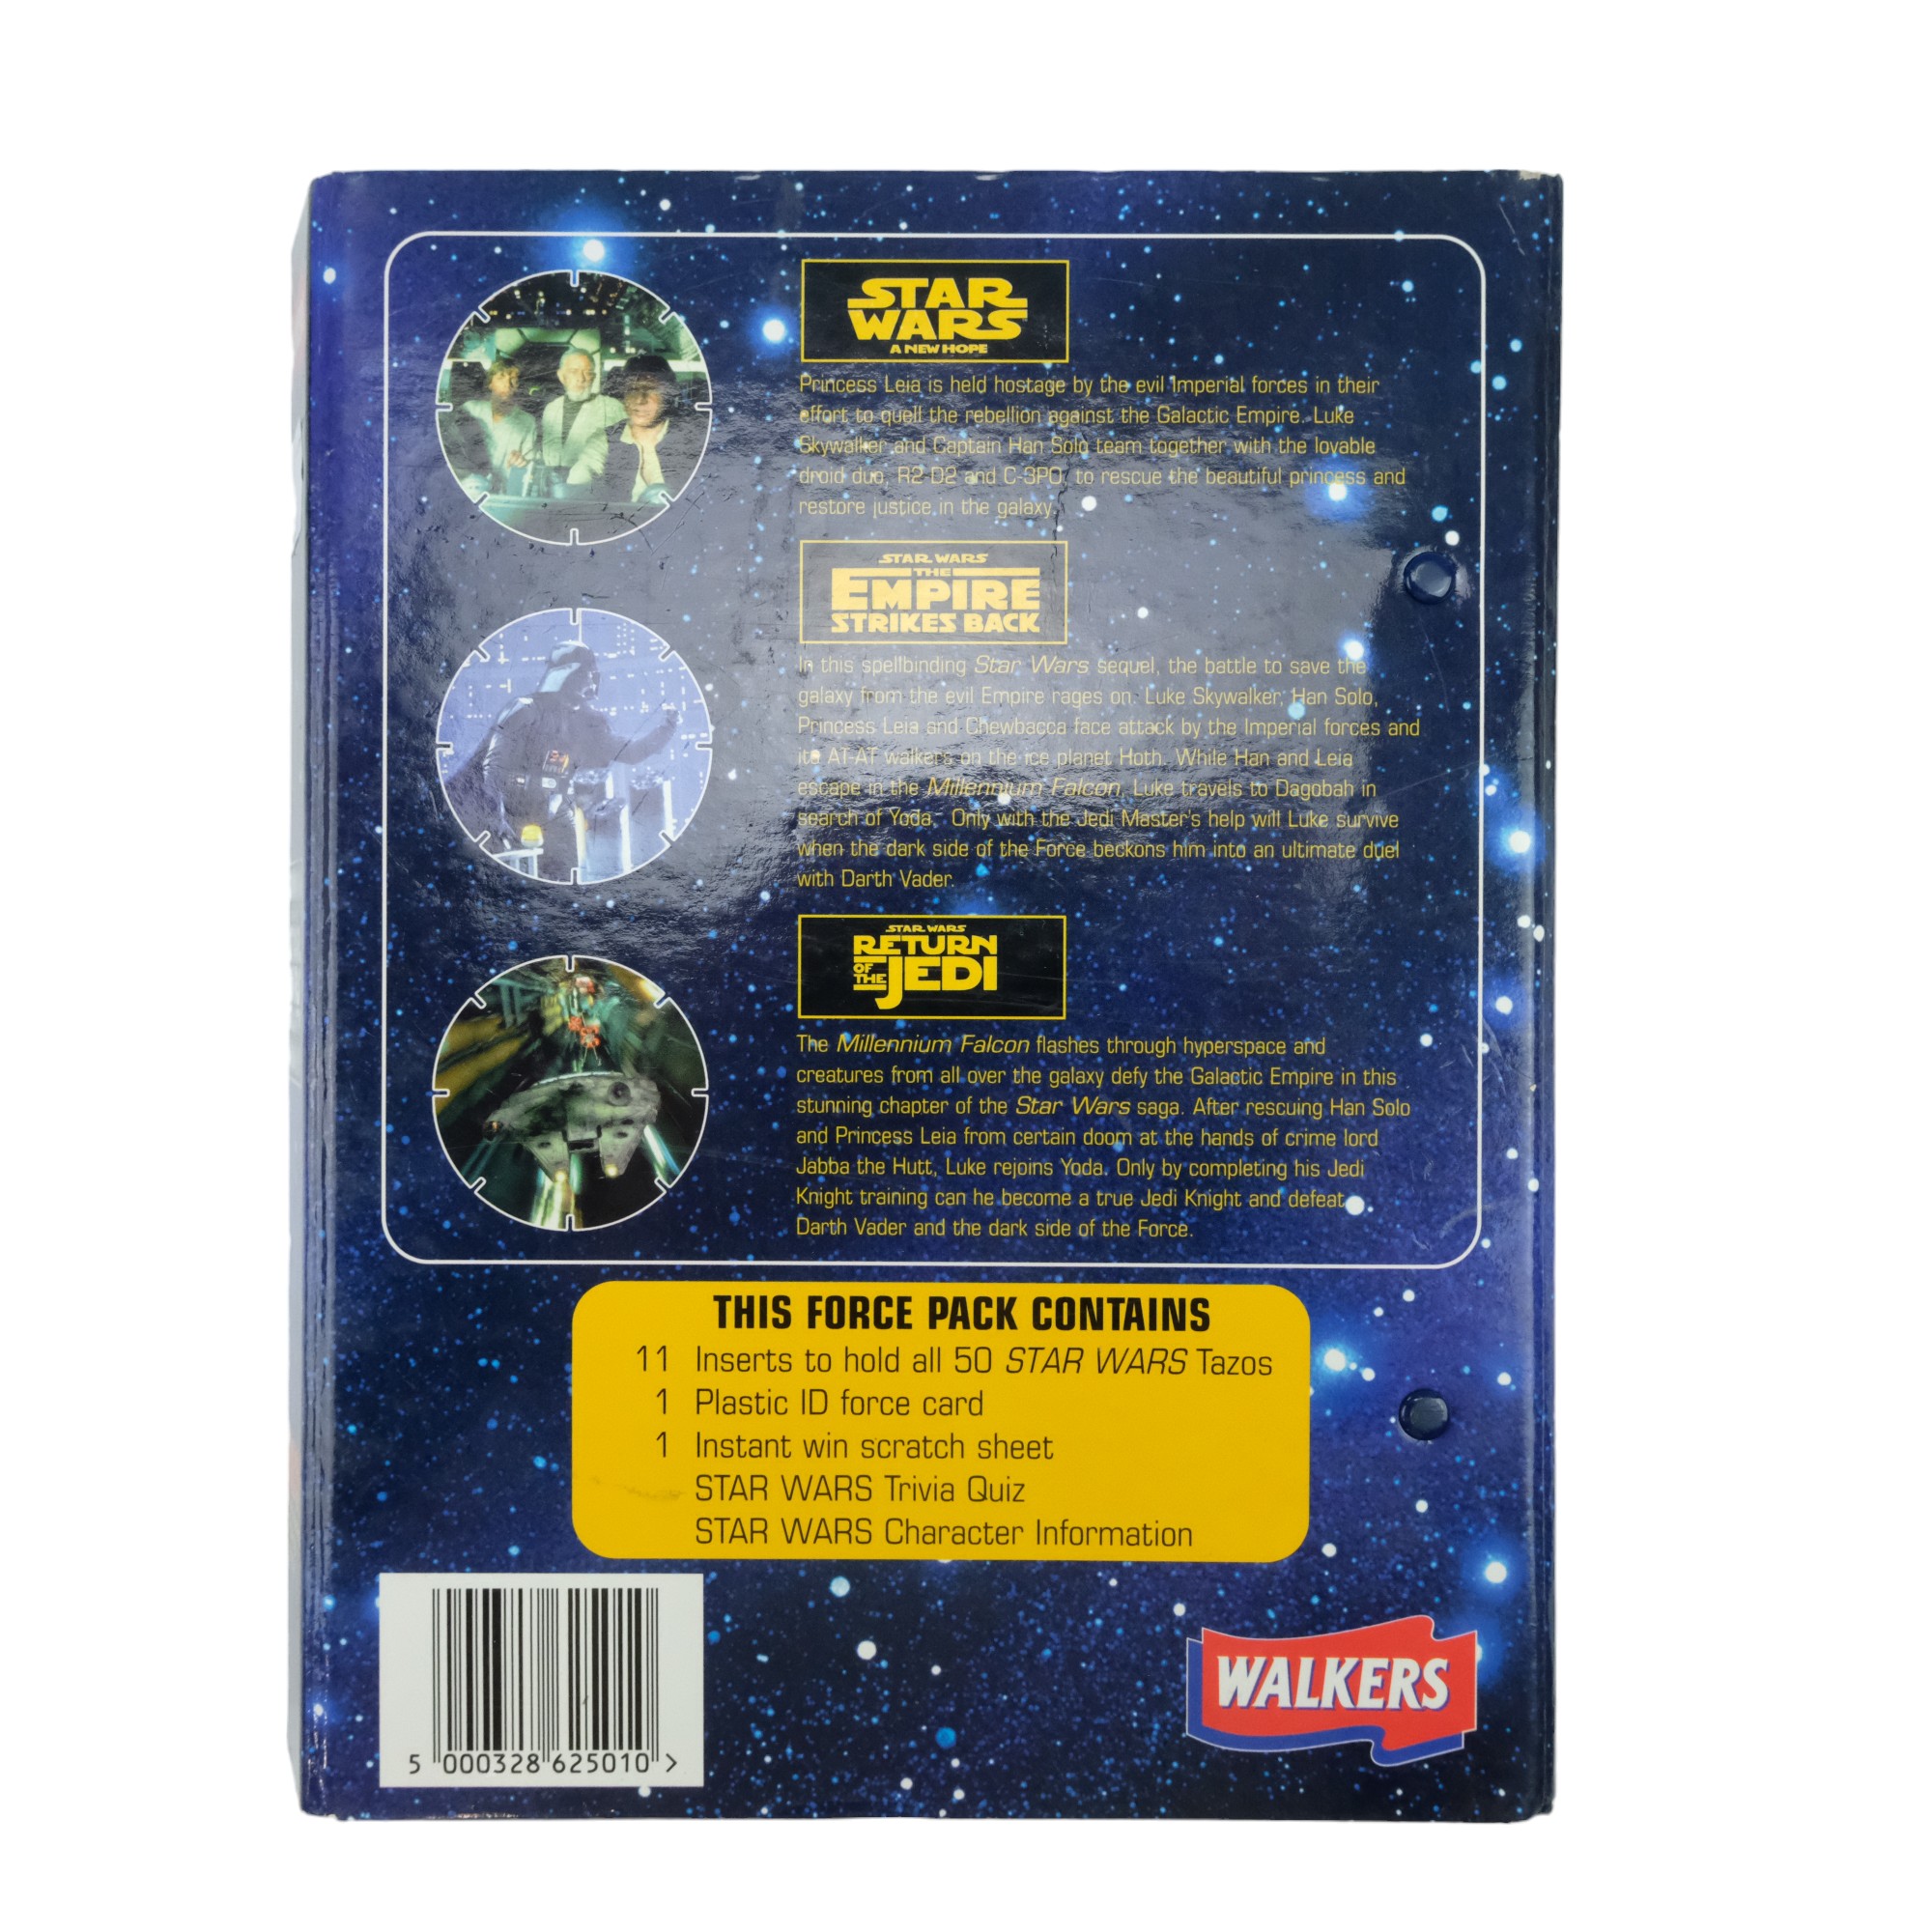 The Star Wars Trilogy edition Tazo collectors force pack - Image 5 of 5